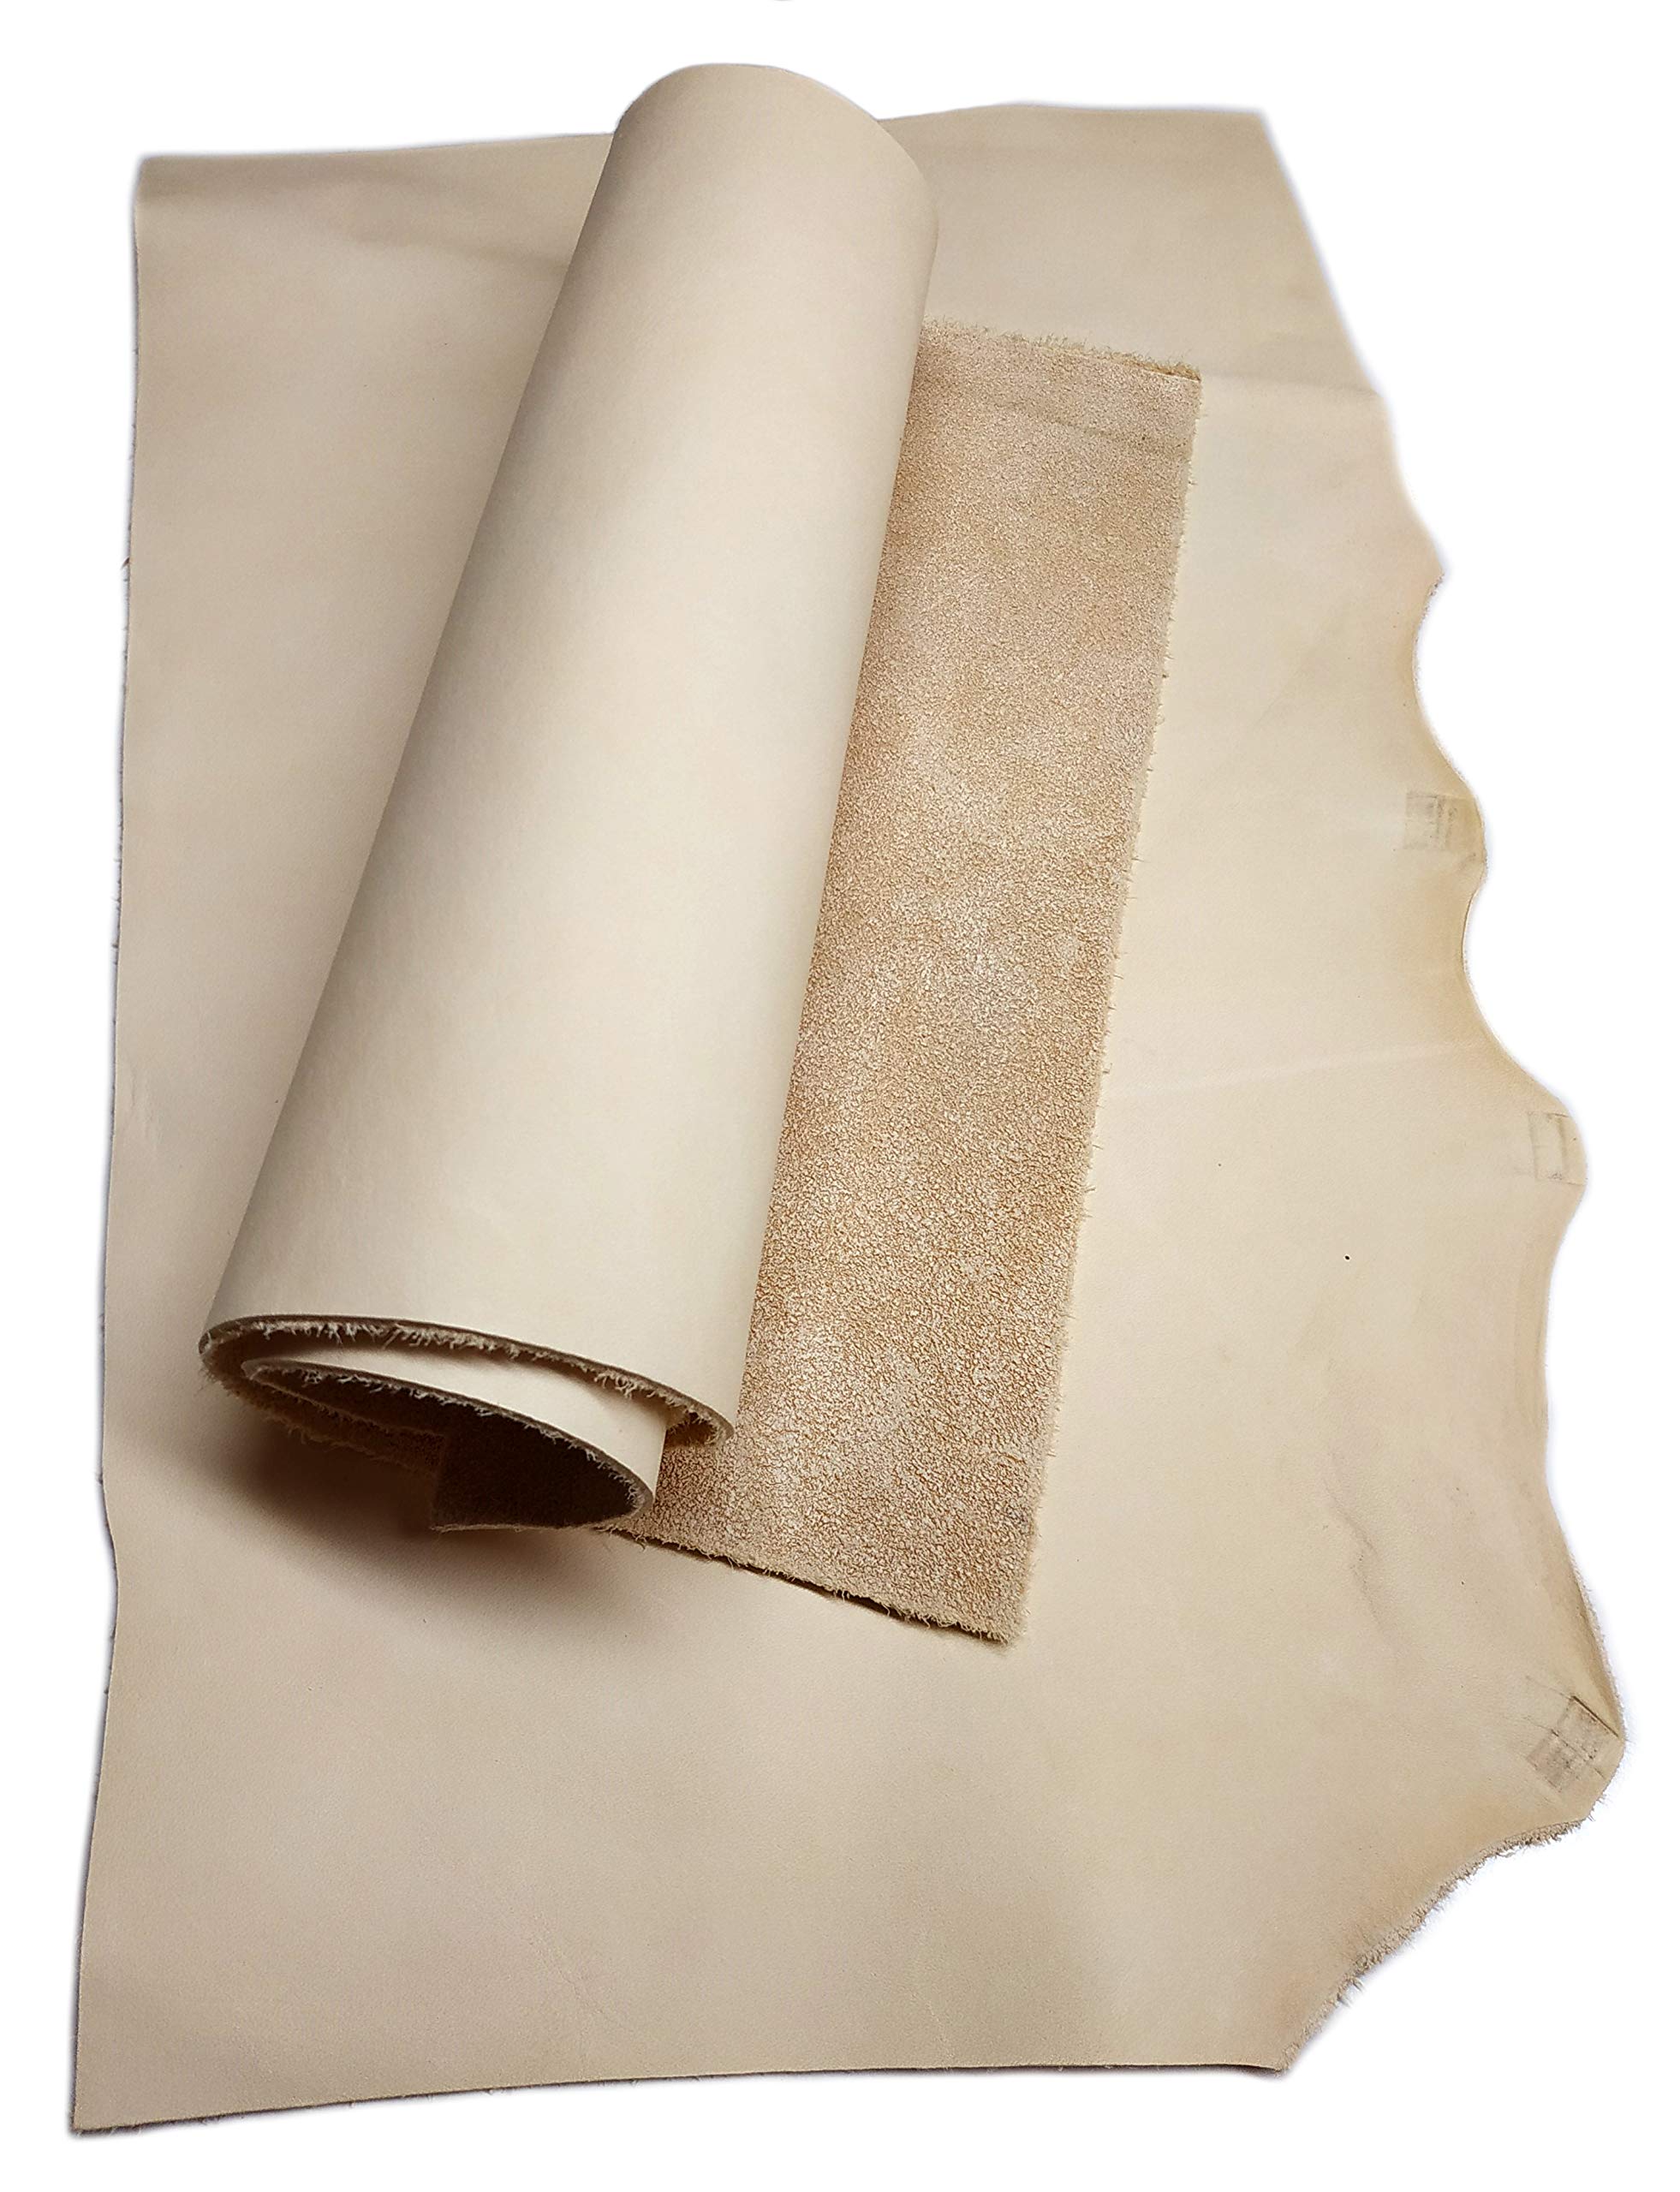 Upon Leather - Veg Tan Leather Pieces 3-4 Sq Feet - 1 LB large pieces and  medium scraps, Medium weight 1.5-2.5 mm thick, Full Grain for Crafts &  Workshop